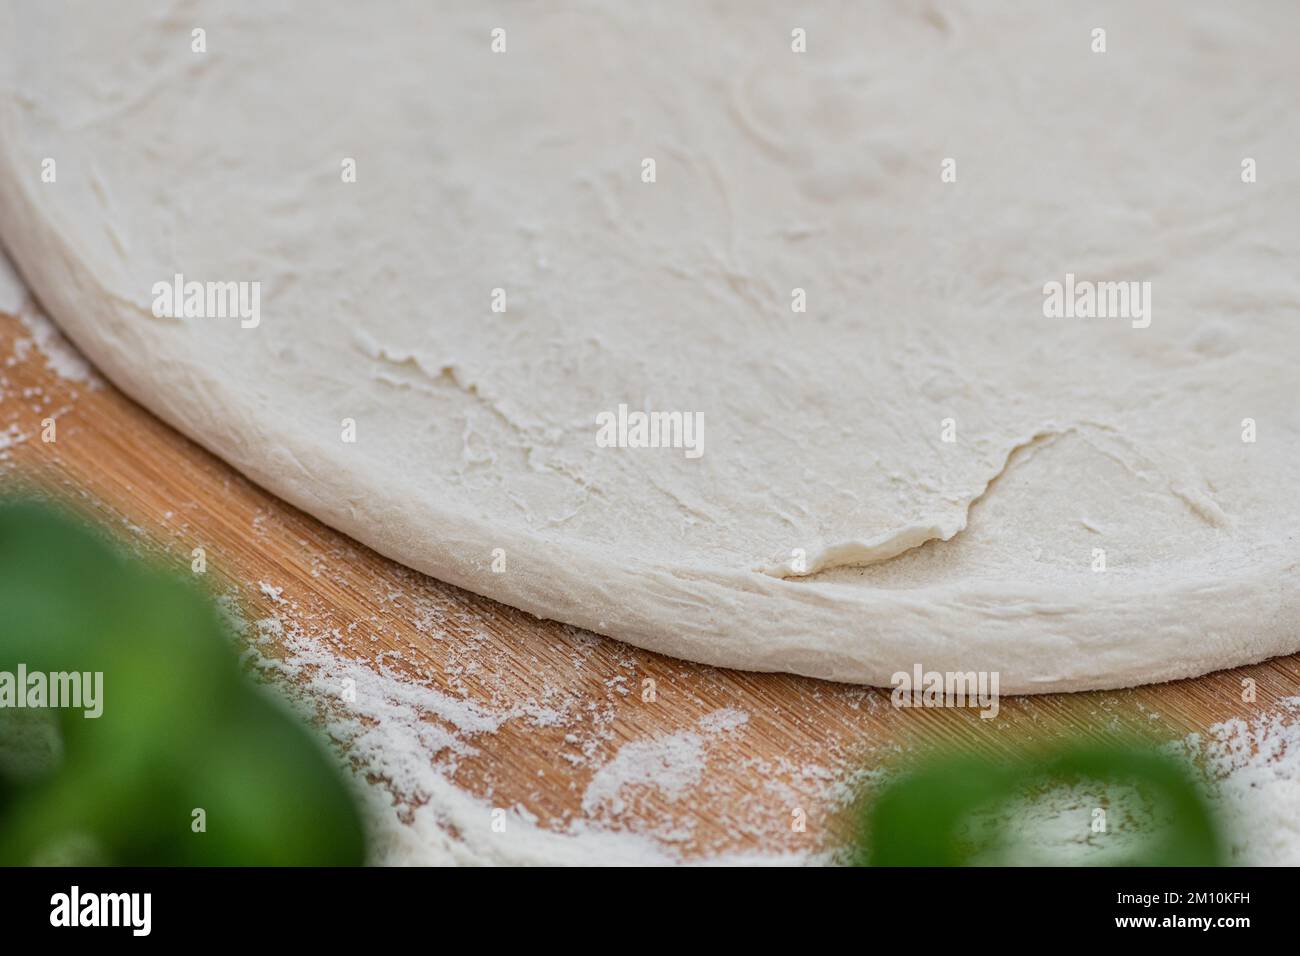 Preparing dough for pizza on a wooden board with white flour and ingredients around, close up, copy space Stock Photo